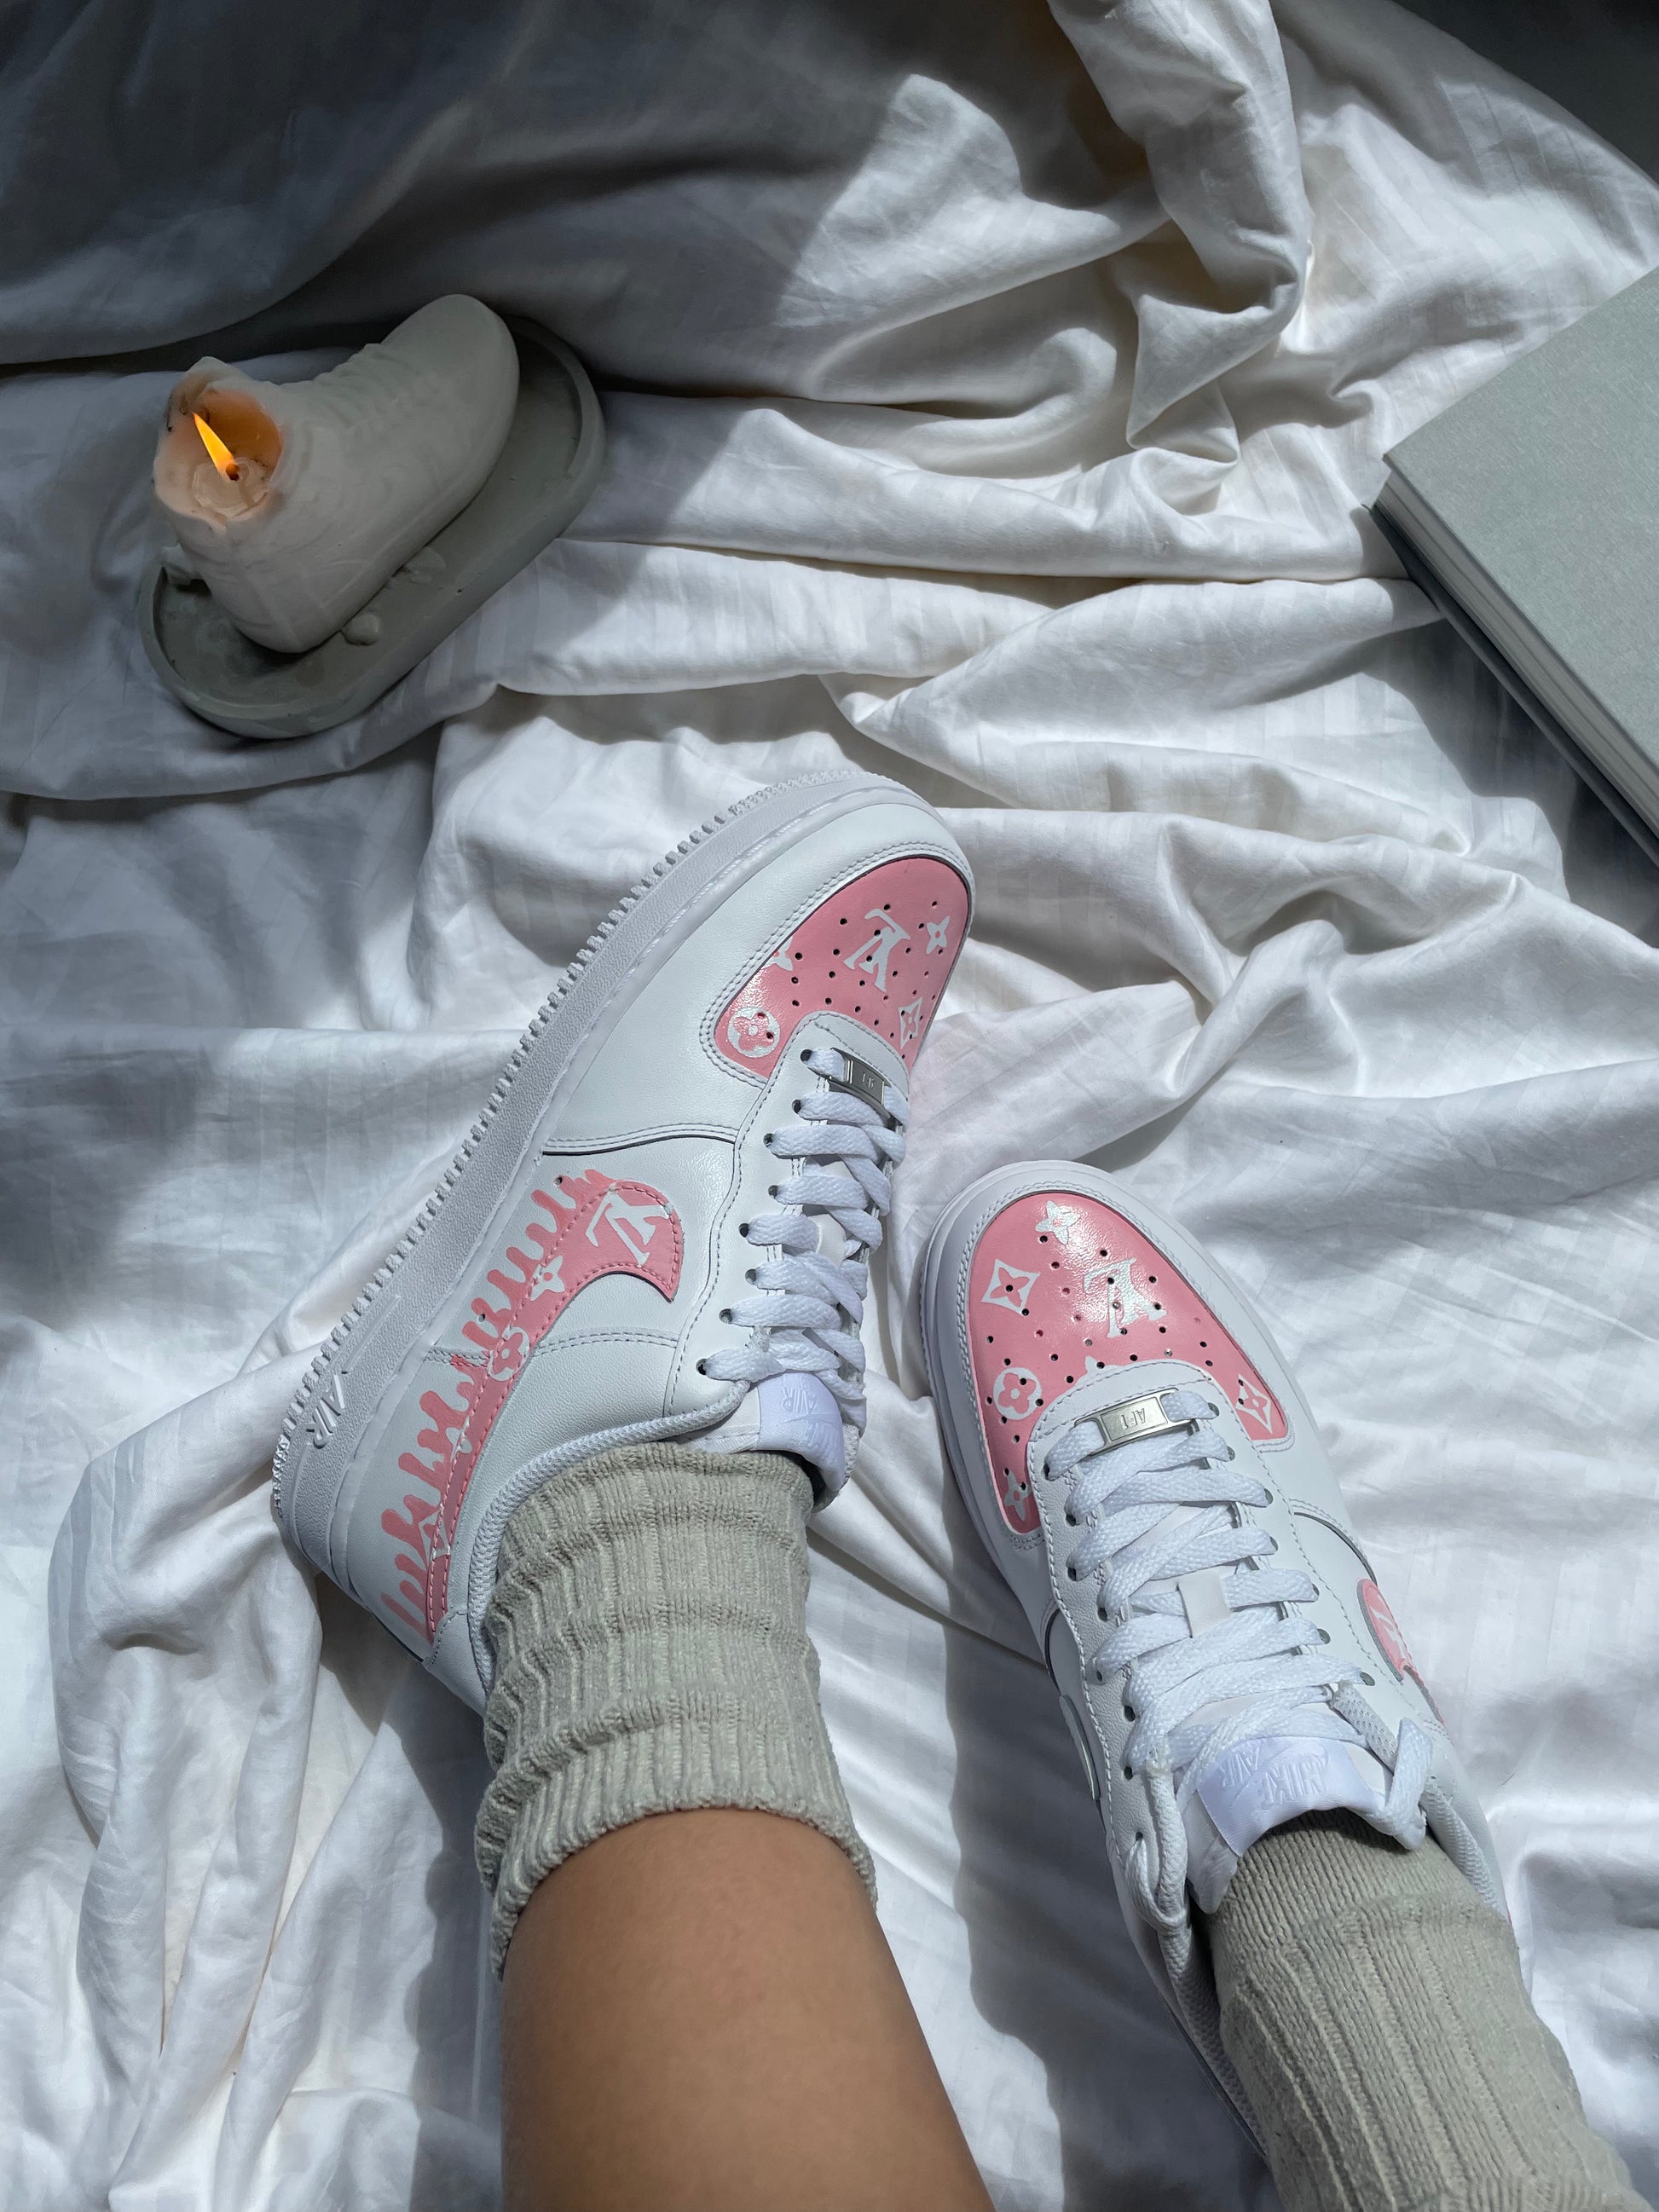 lv air force 1 pink